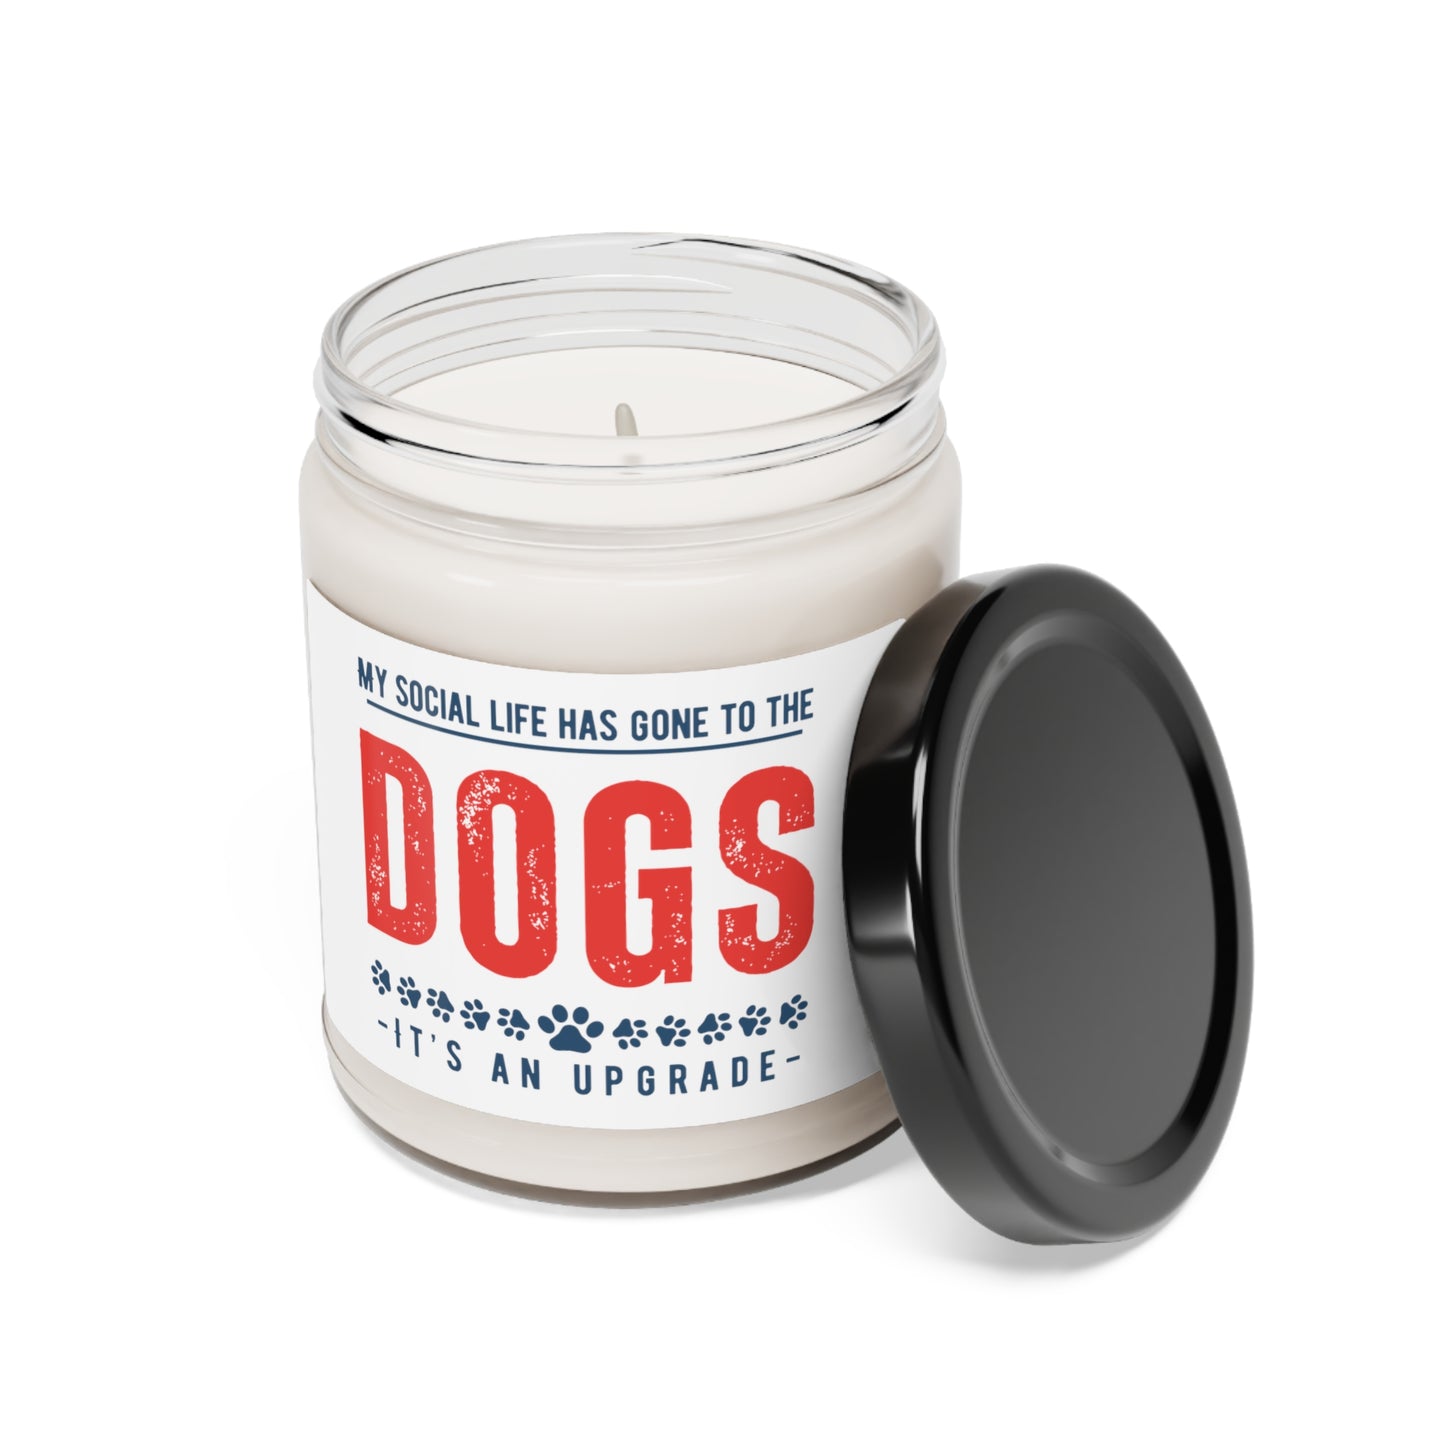 My Social Life Has Gone To The Dogs Scented Soy Candle, 9oz